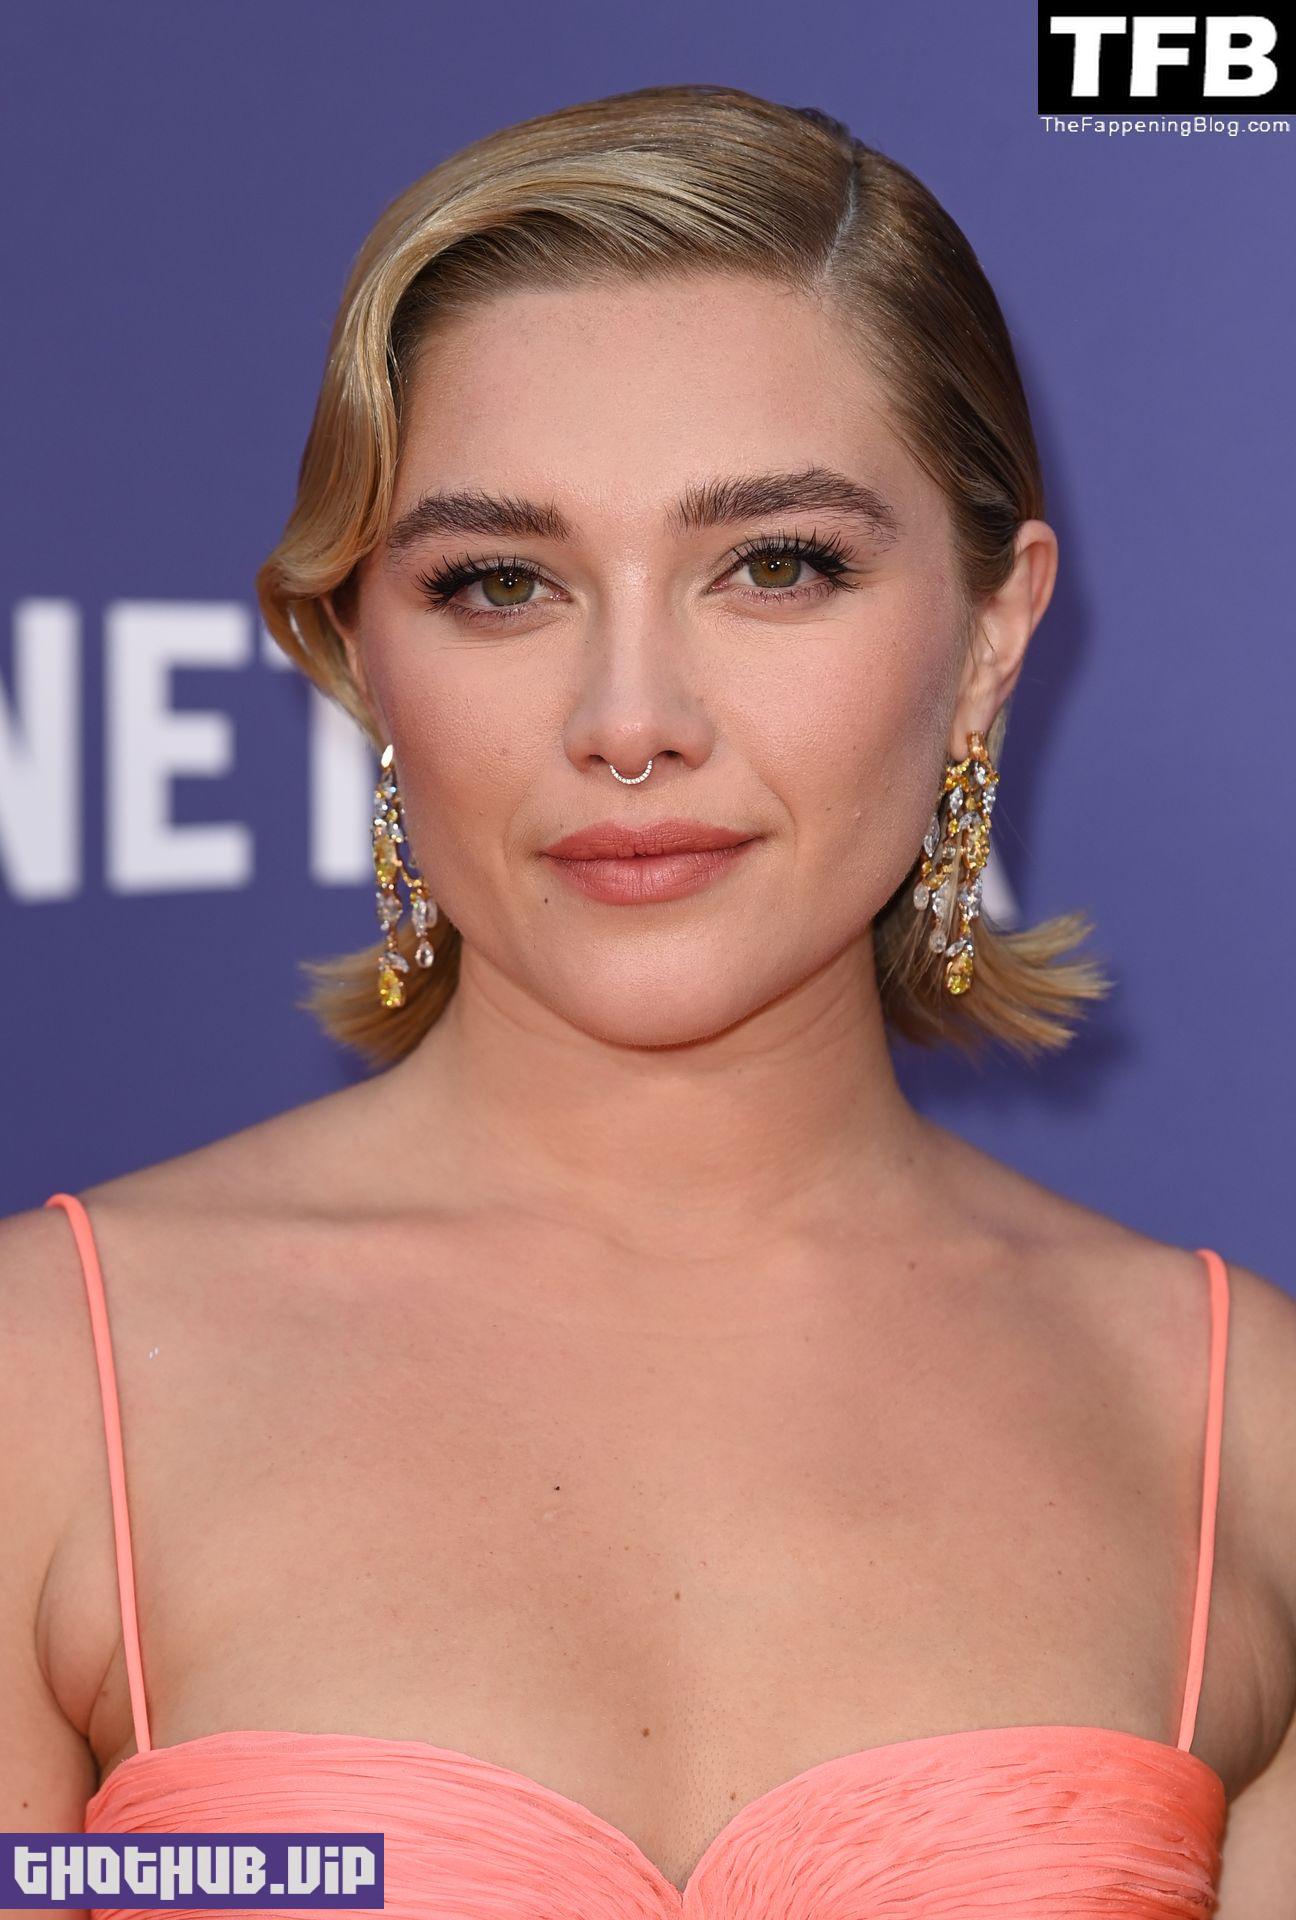 Florence Pugh Sexy The Fappening Blog 67 1